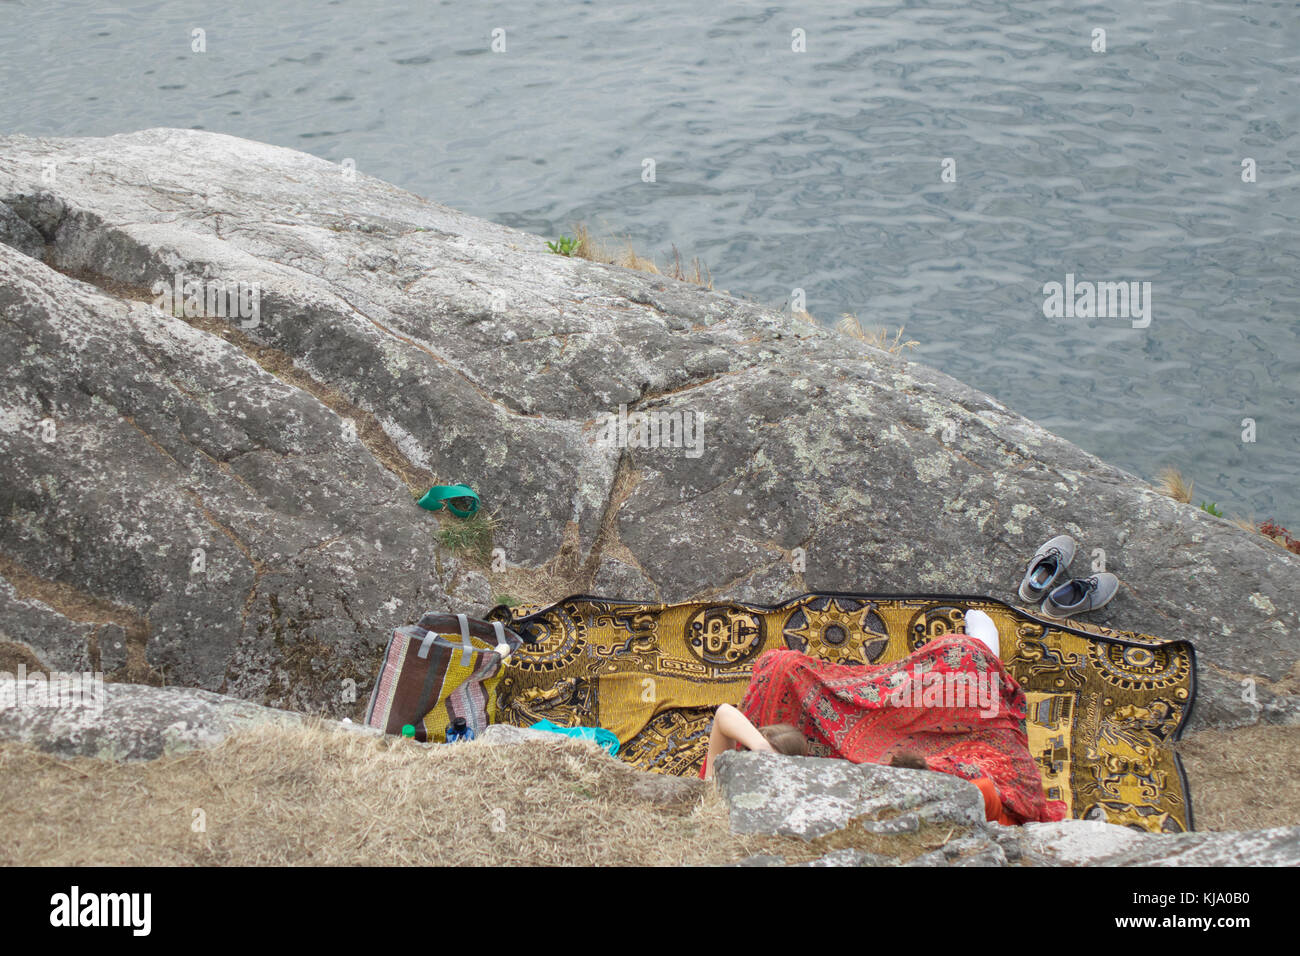 Looking down at partial view of 2 unrecognizable people seated on a colorful patterned blanket on a rock enjoying view of the water below. Stock Photo